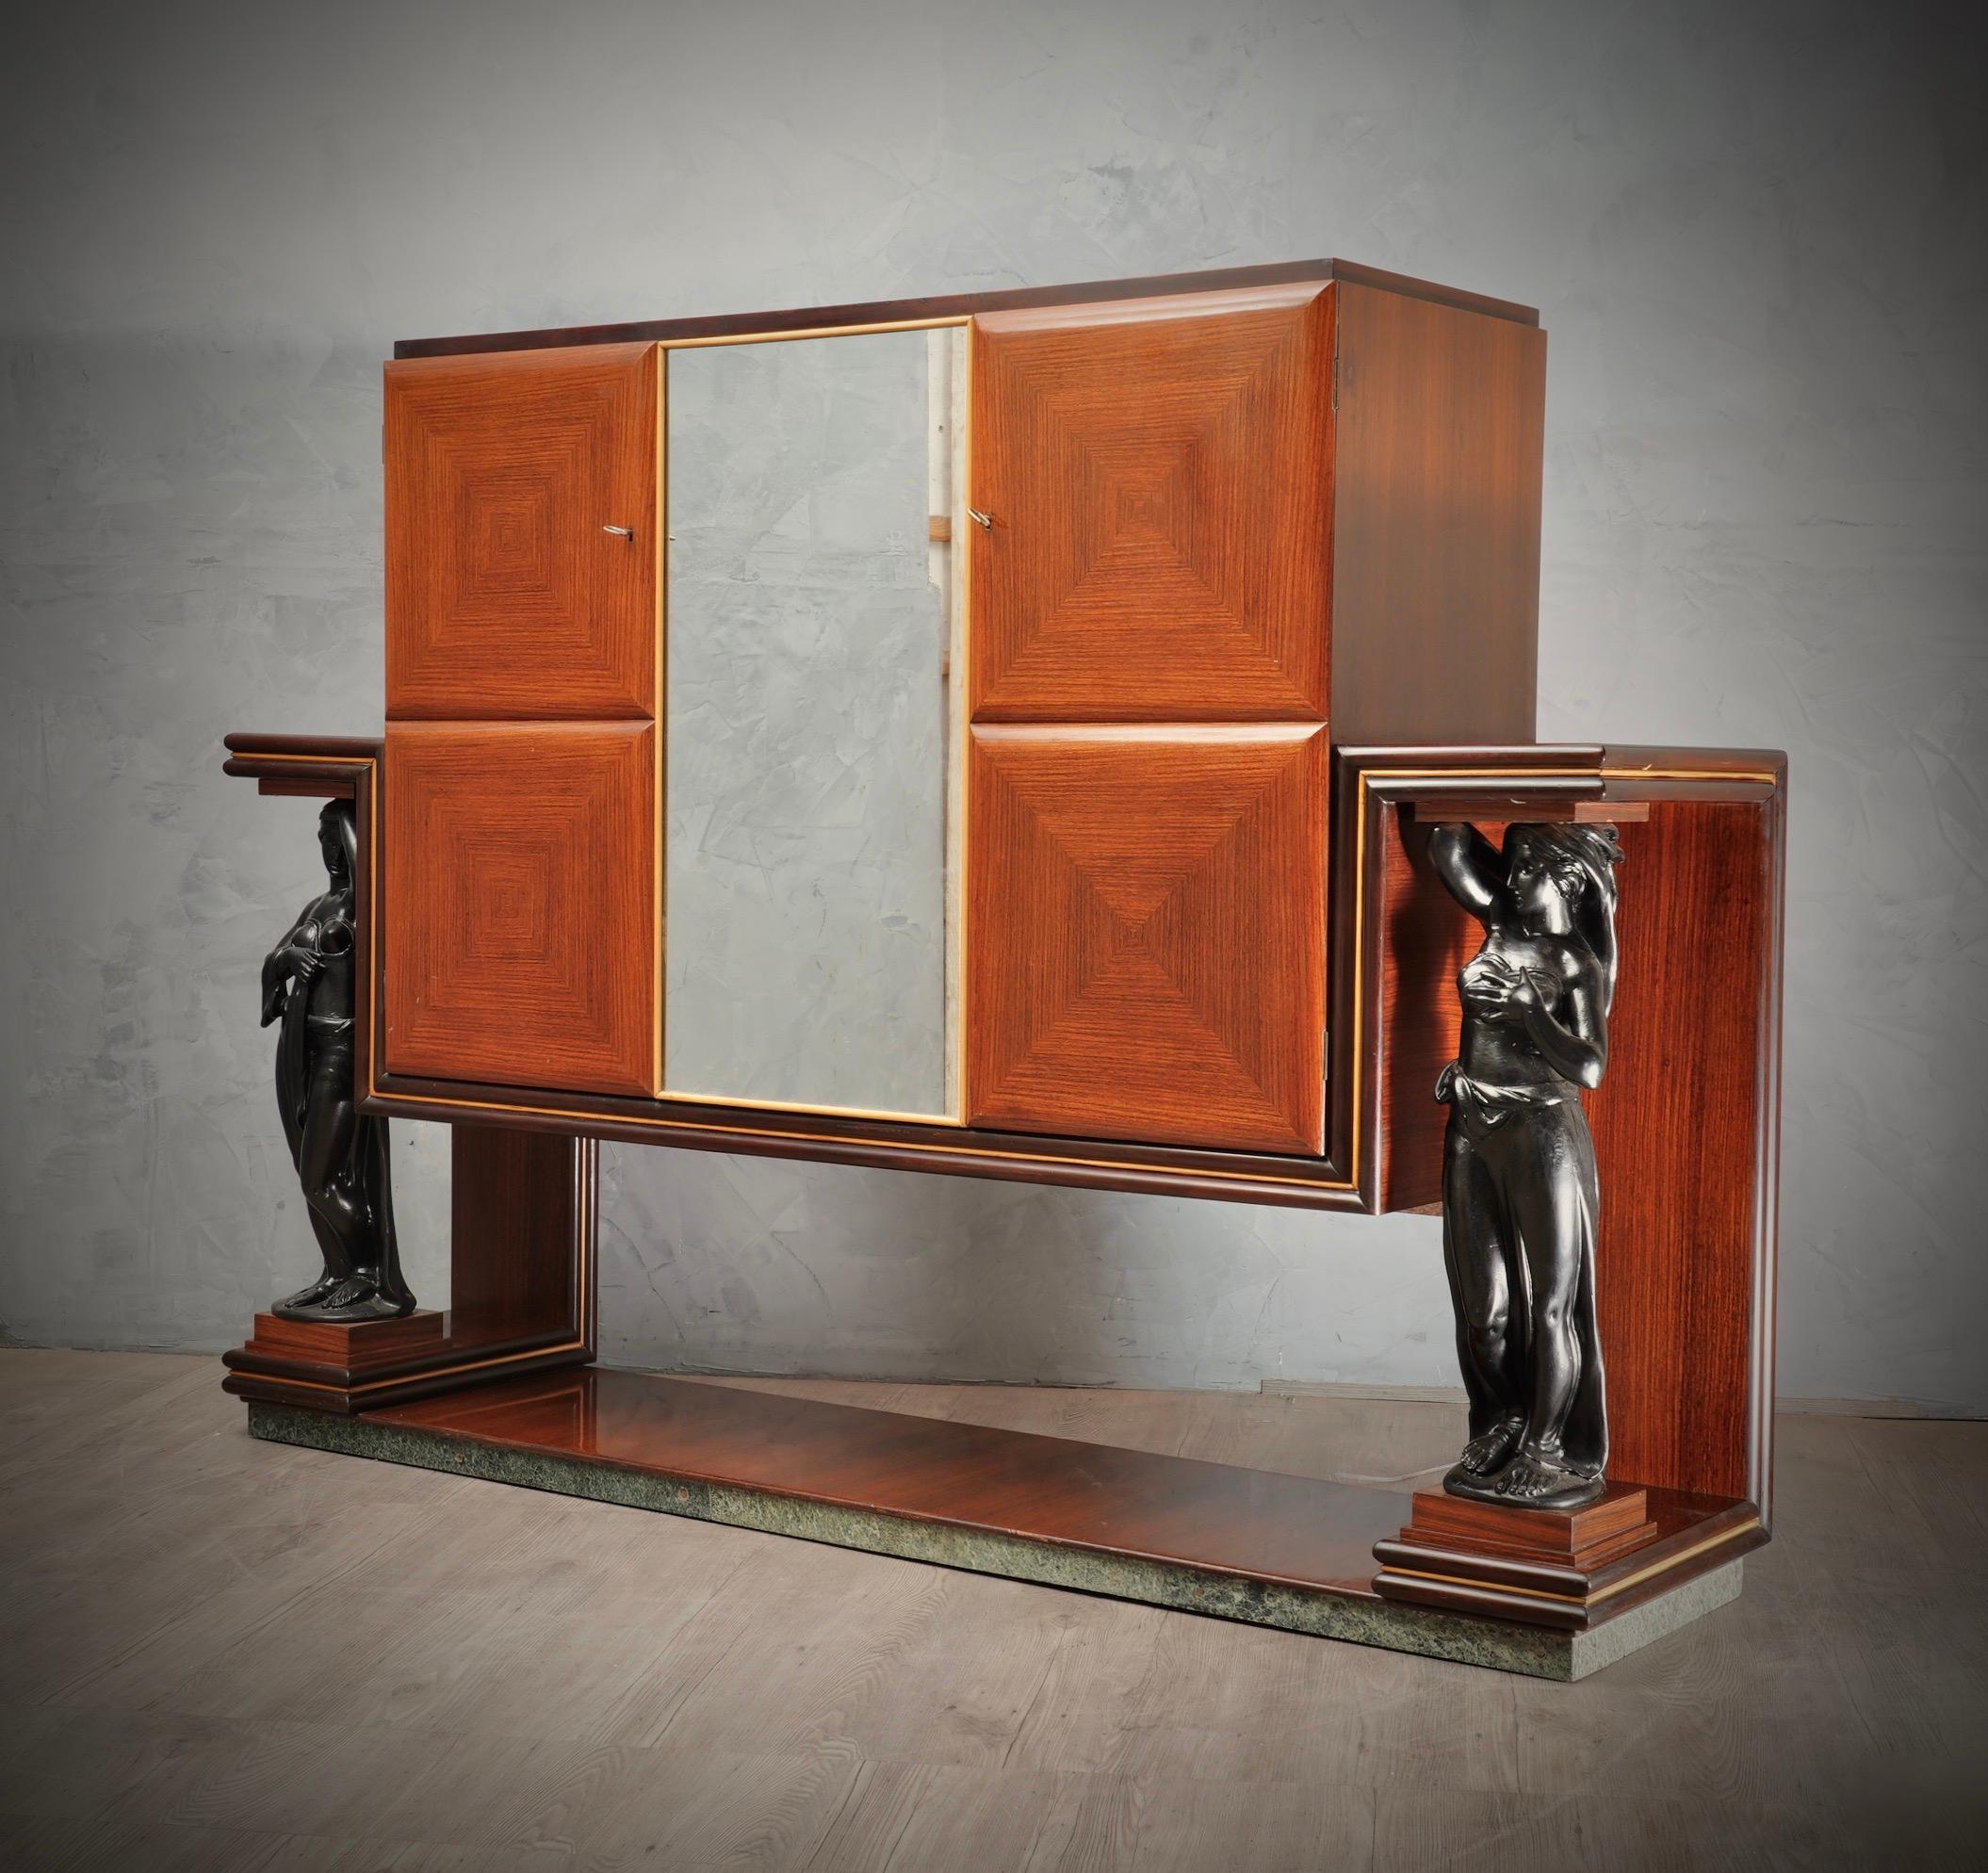 Beautiful bar cabinet in characteristic Italian style of Paolo Buffa, Vittorio Dassi and Osvaldo Borsani.

All veneered in walnut wood. The cabinet is formed by a central body whit three doors, and two wooden sculptures polished in black lacquer